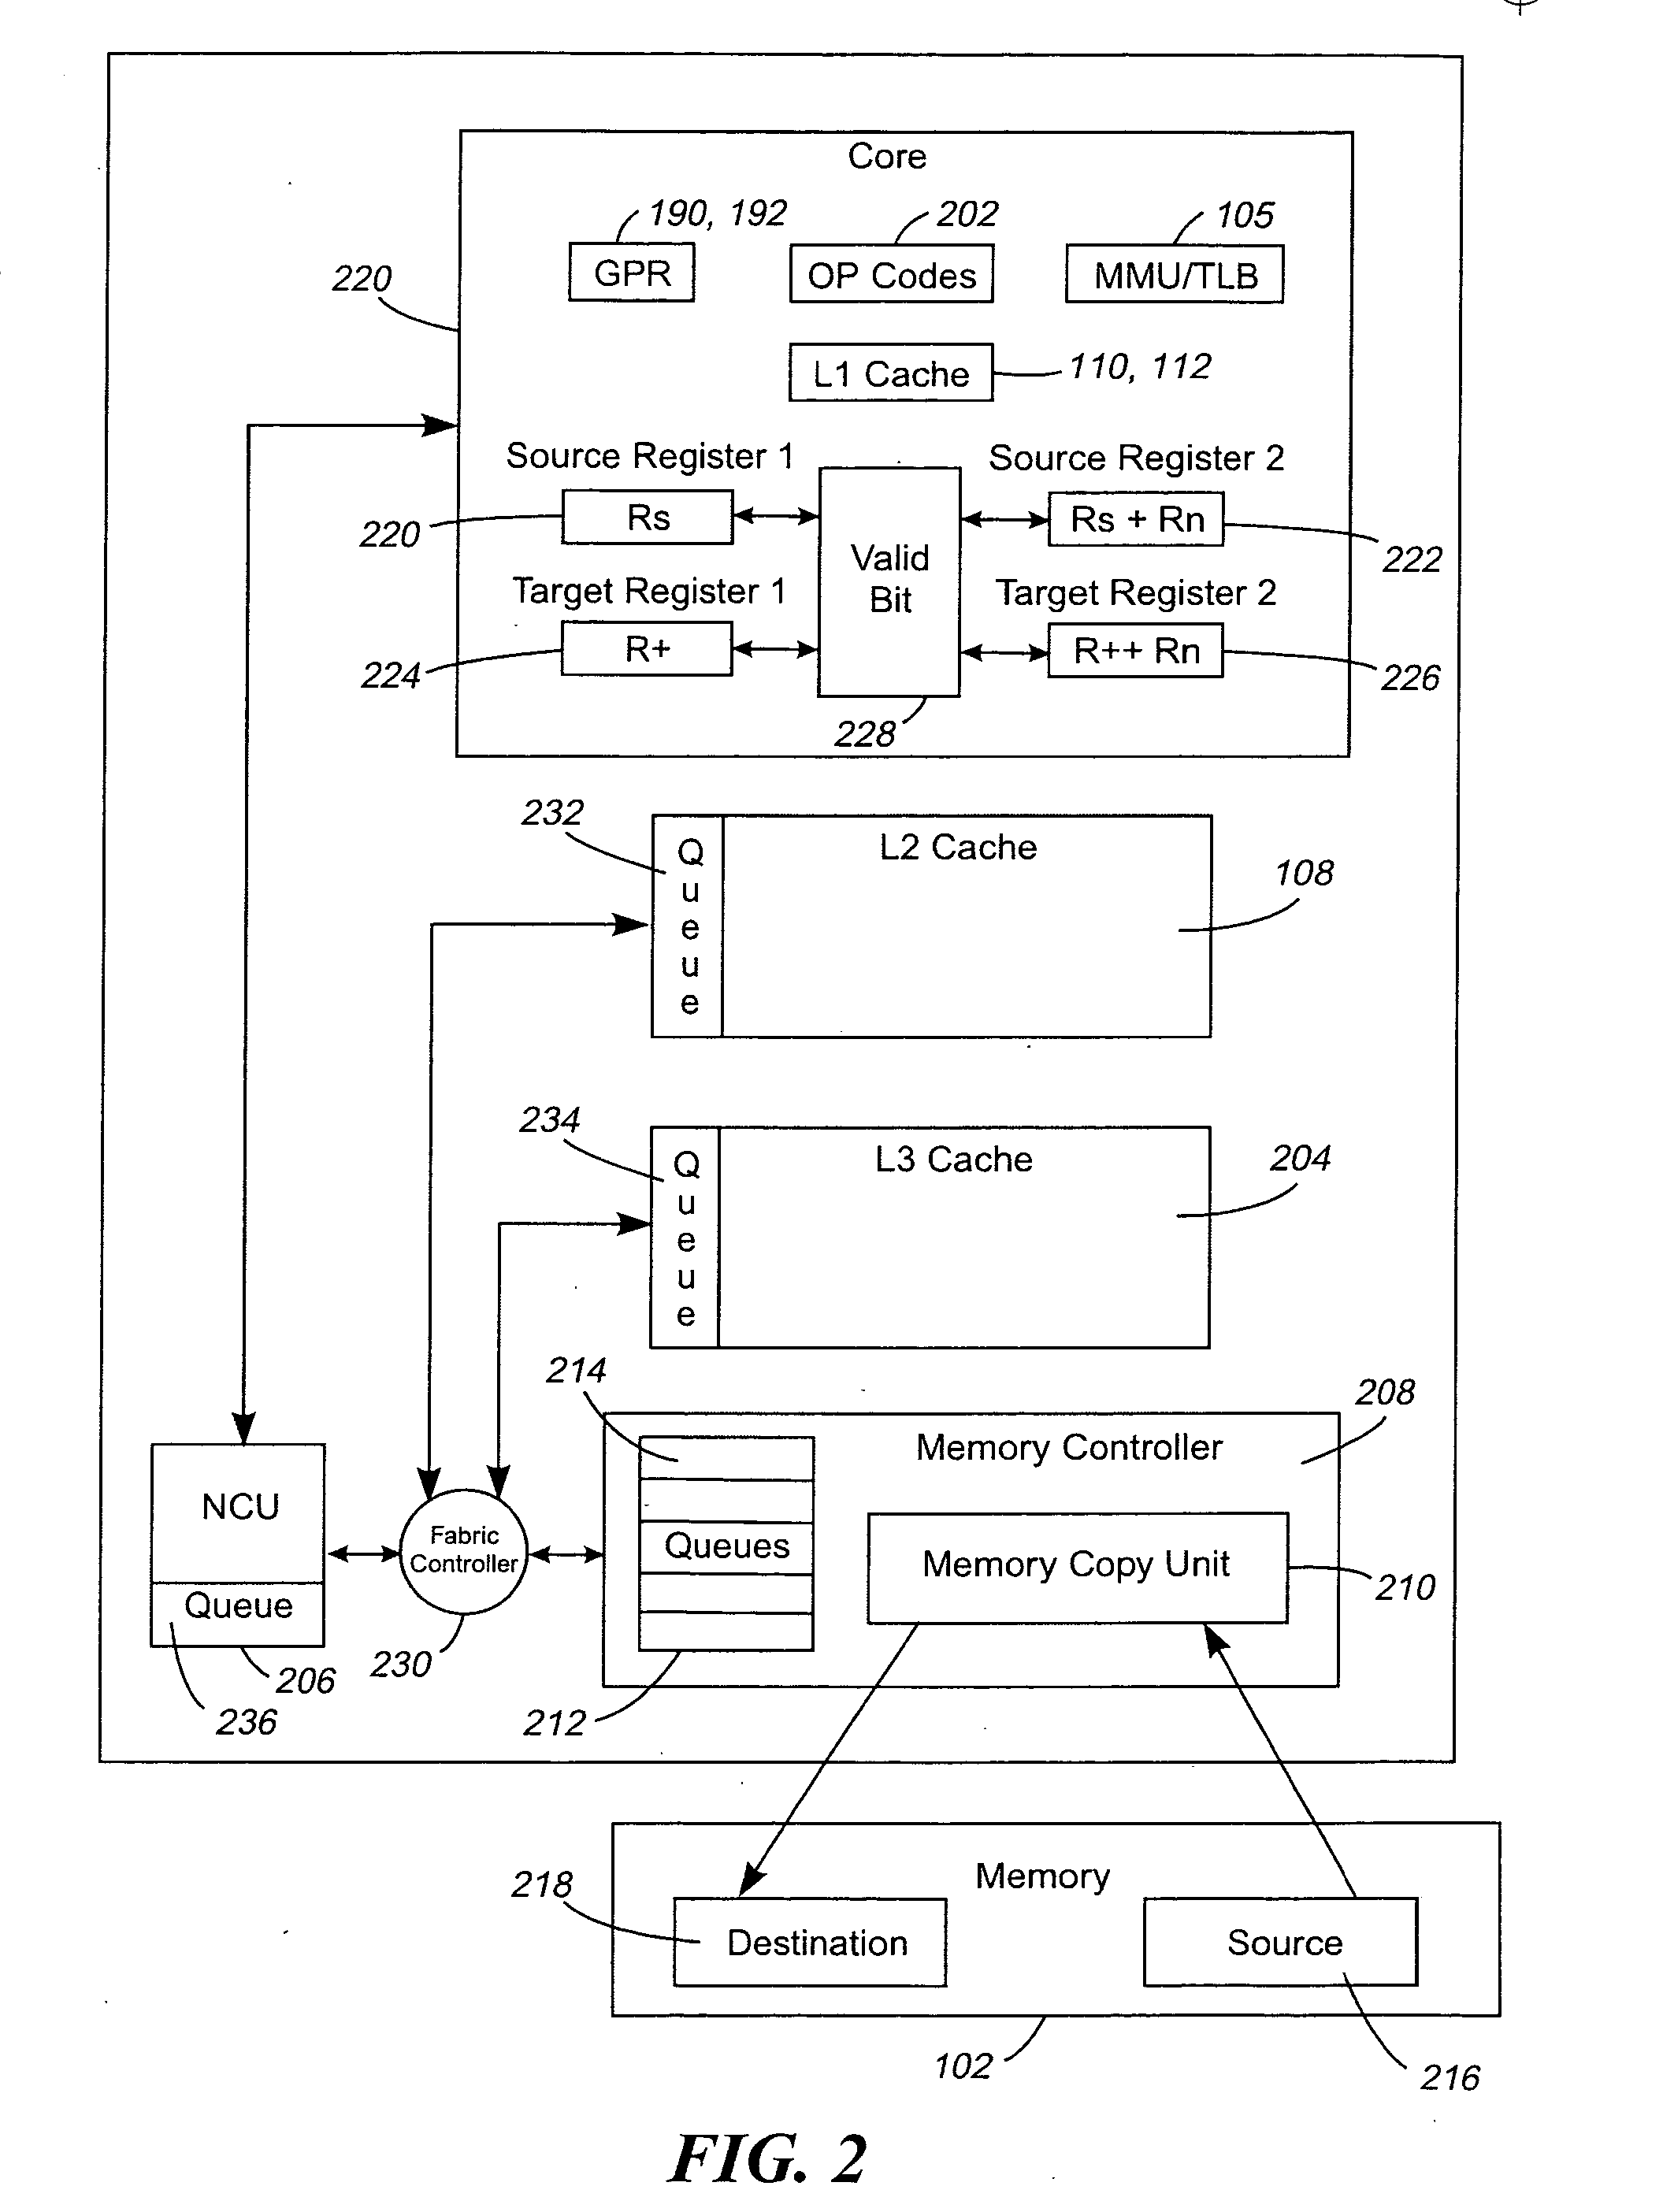 Cache injection semi-synchronous memory copy operation